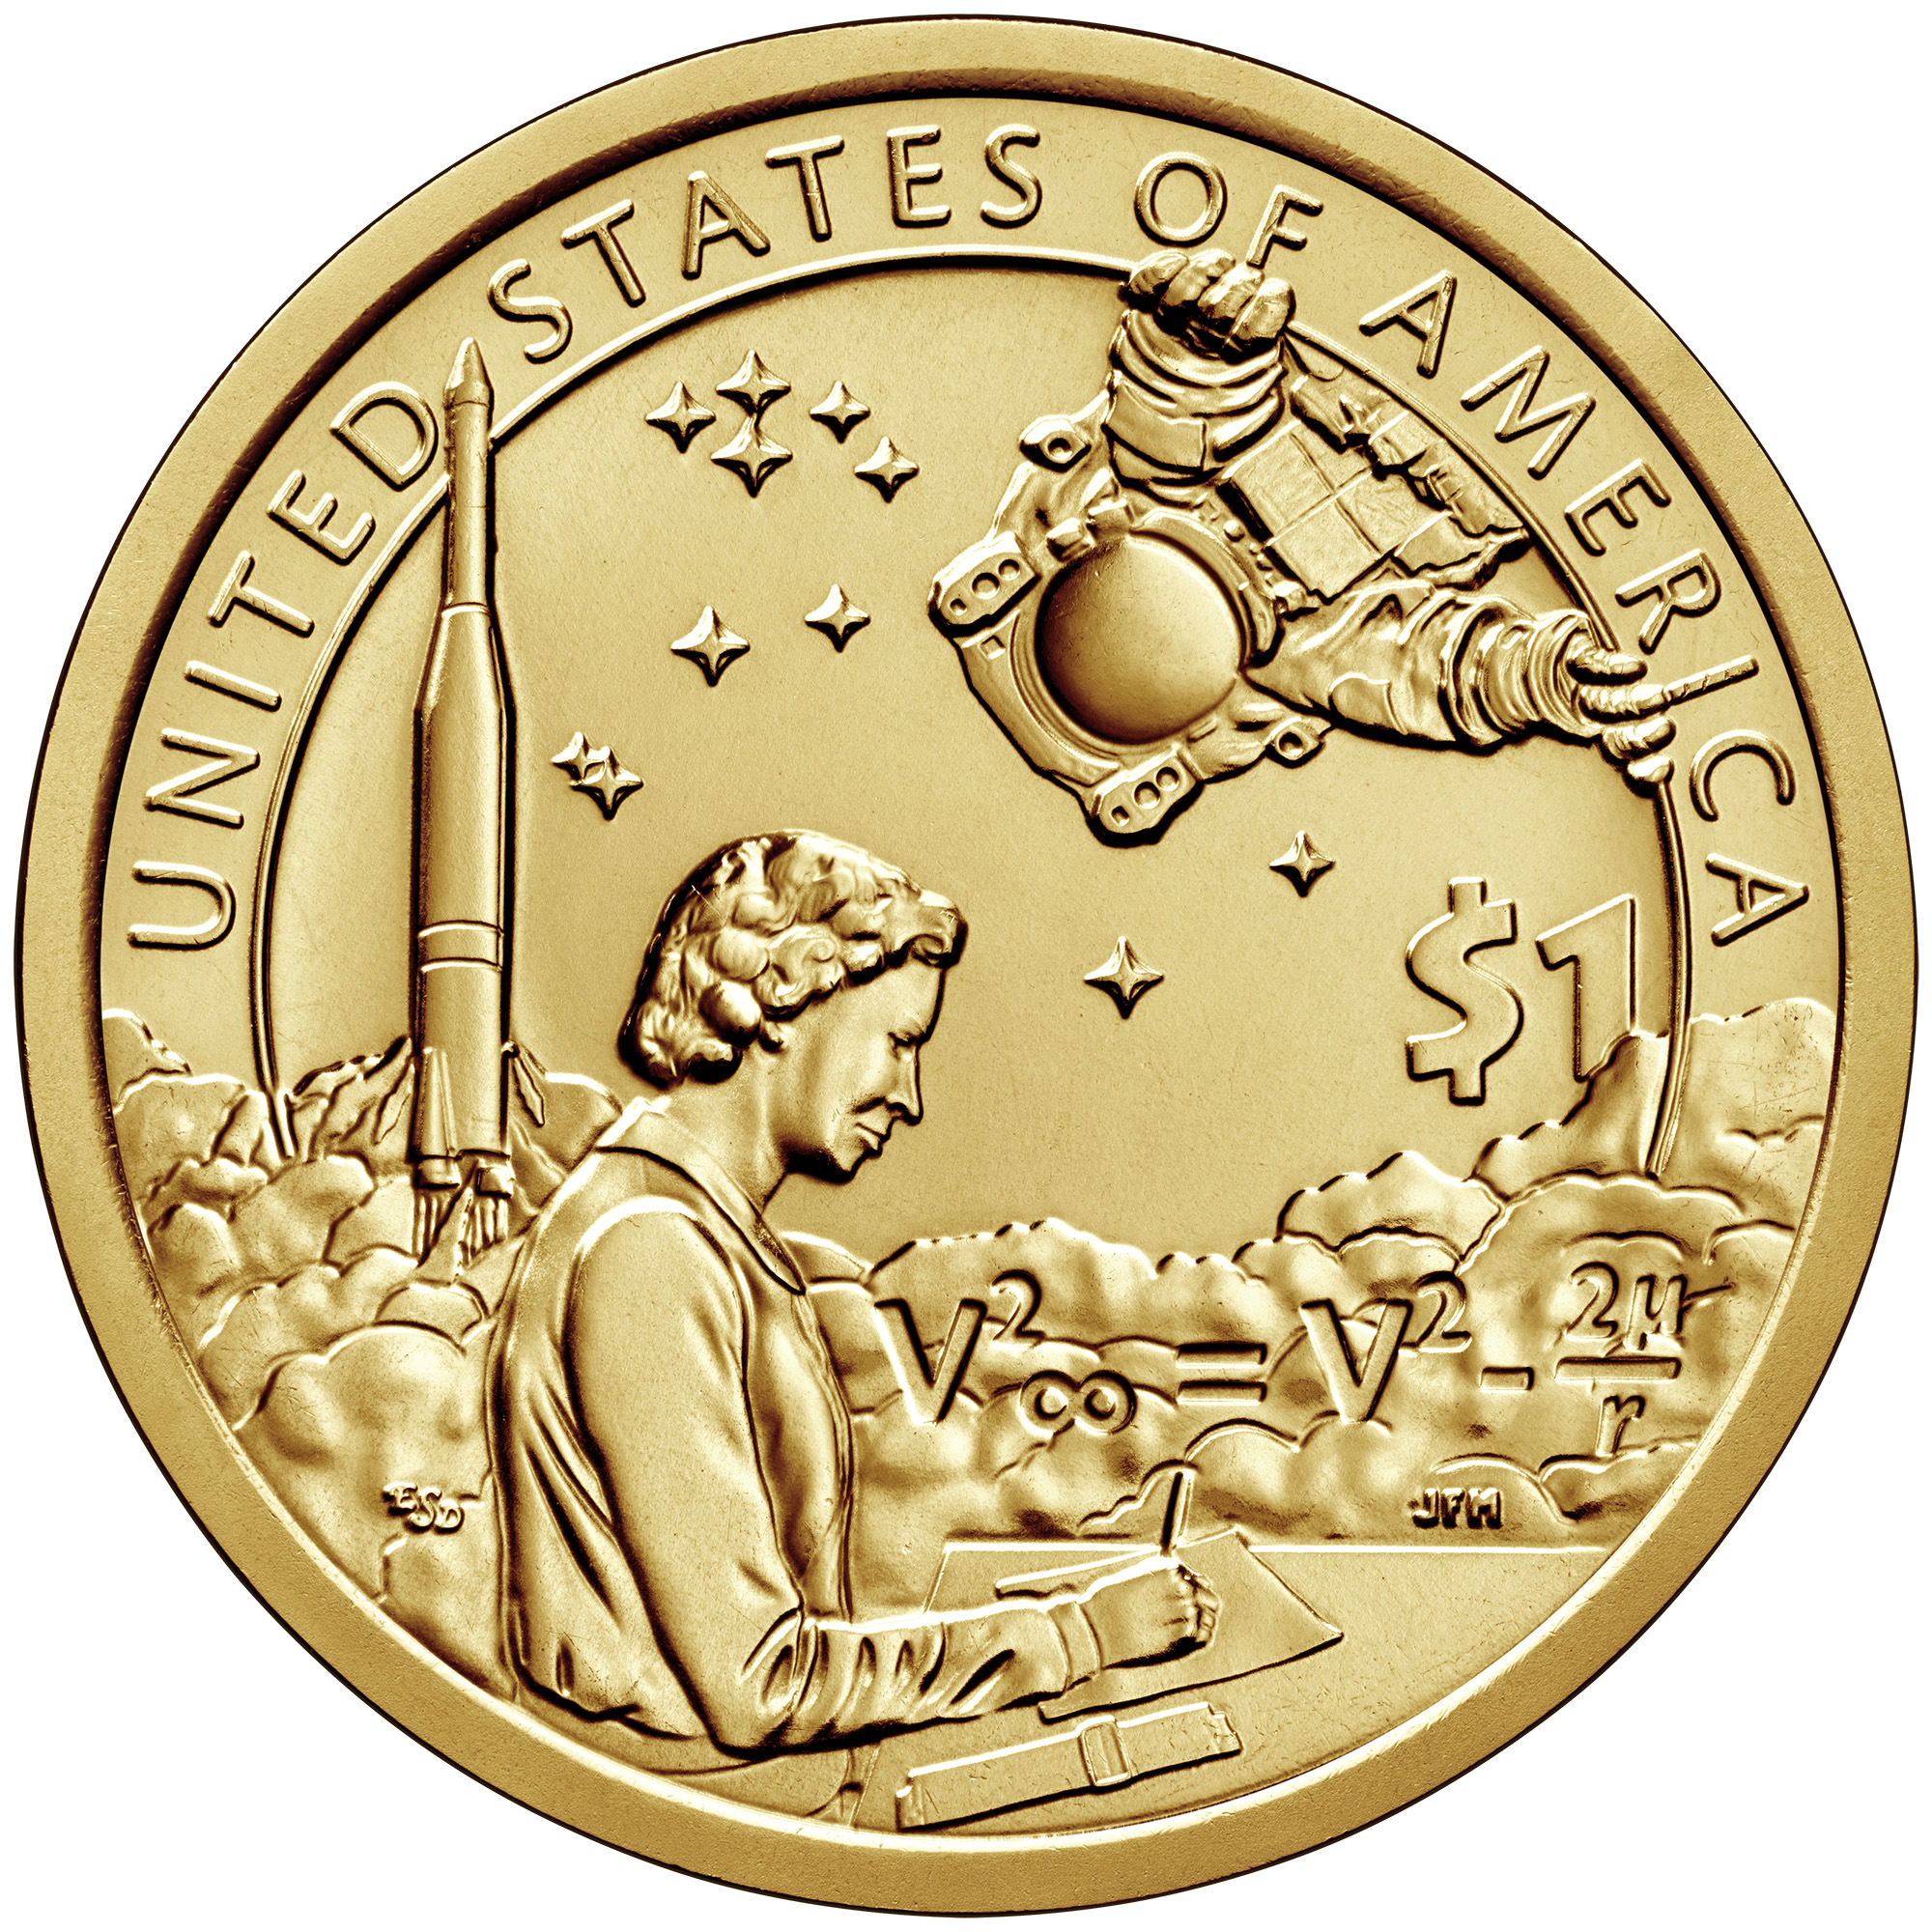 Reverse, 2019 Native American $1 golden coin. Image courtesy US Mint